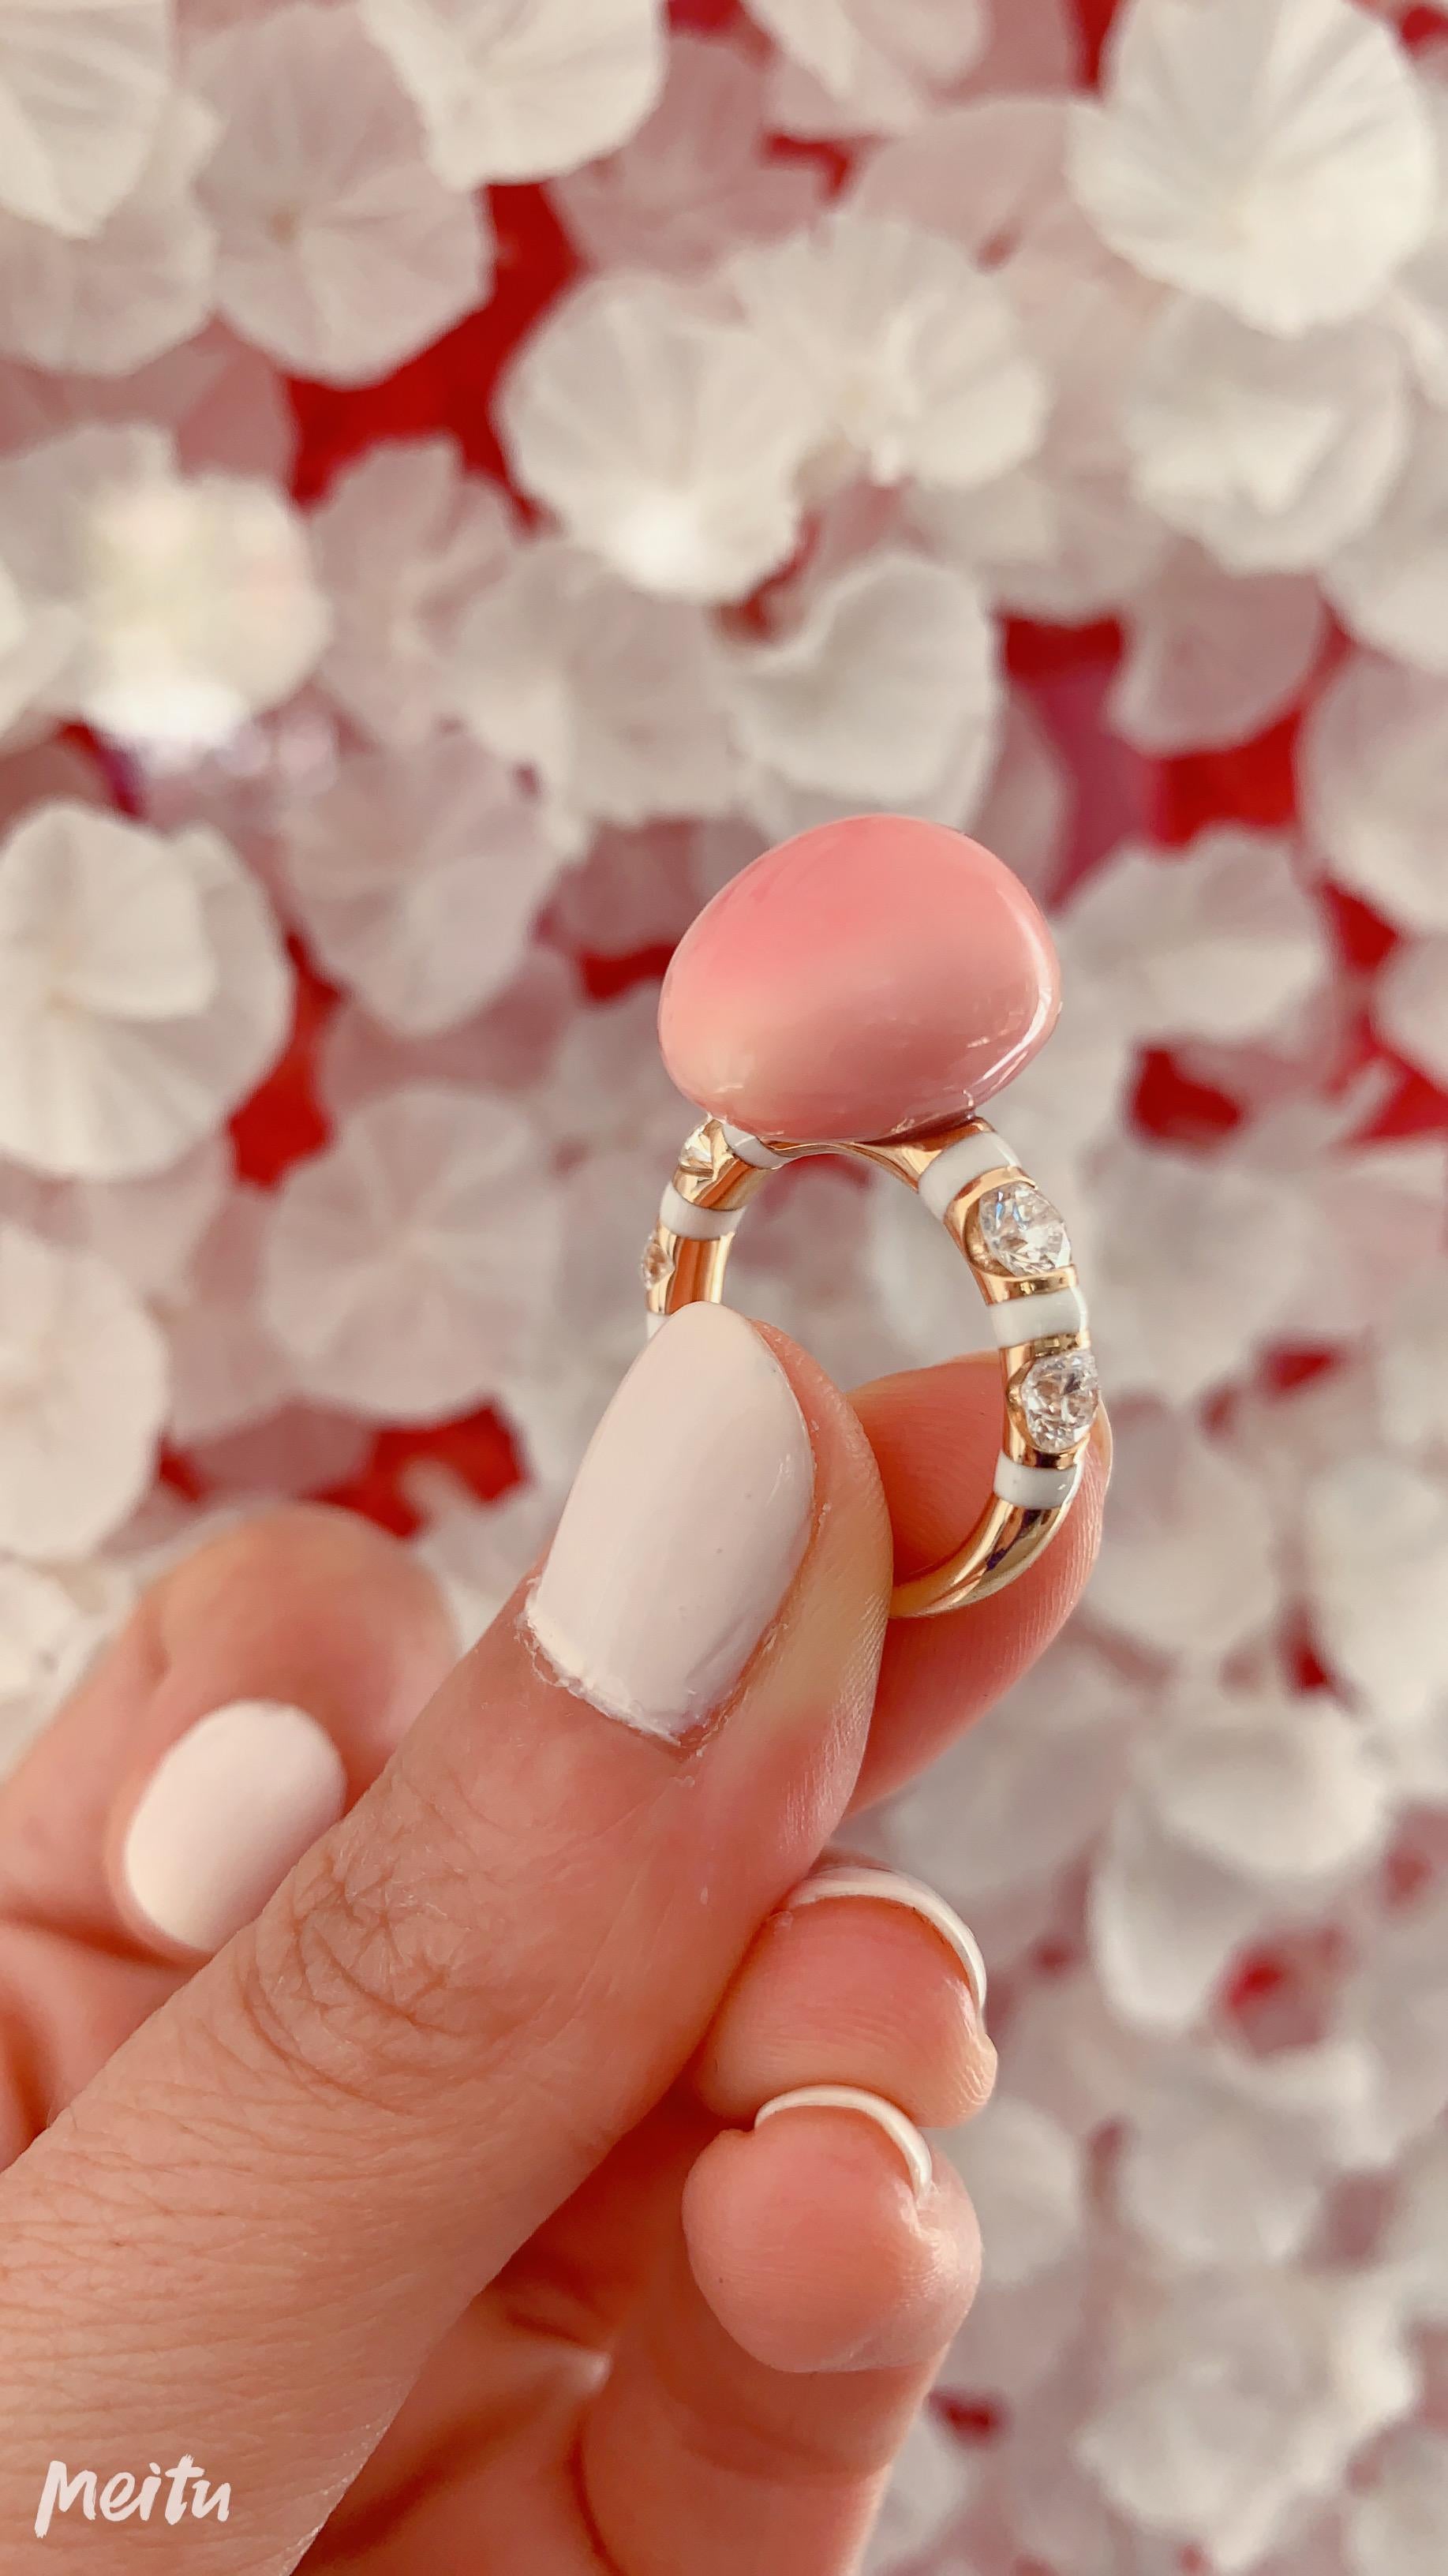 A Pink Conch Pearl, Diamond and Enamel Gold Ring in the Candy Collection by Jewelry Designer, Sarah Ho.

This 17.75ct pink conch pearl is set between four tension set F VS diamonds of total 1.06ct in an 18kt rose gold ring with white enamel bands.